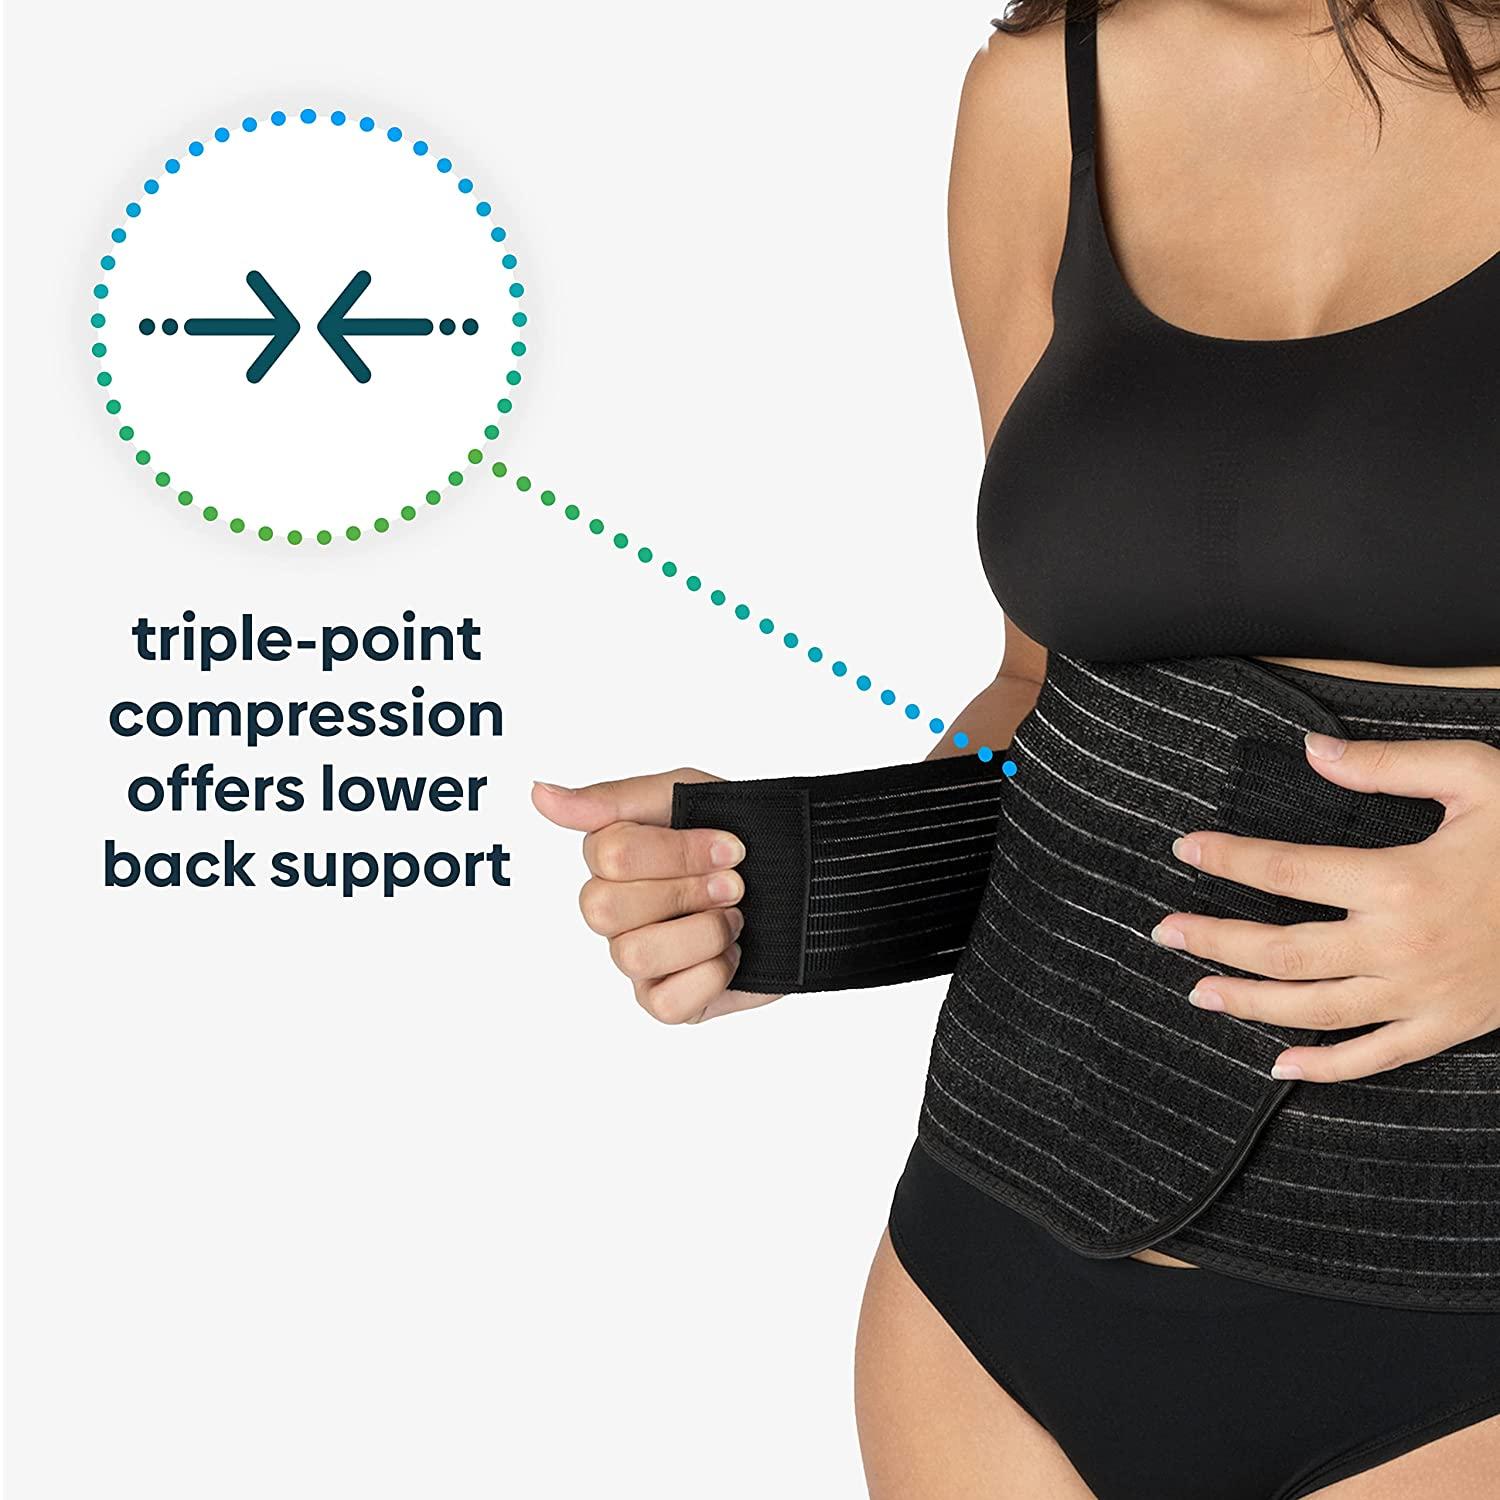 Upspring Shrinkx Postpartum Belly Wrap With Bamboo Charcoal Fiber : Target